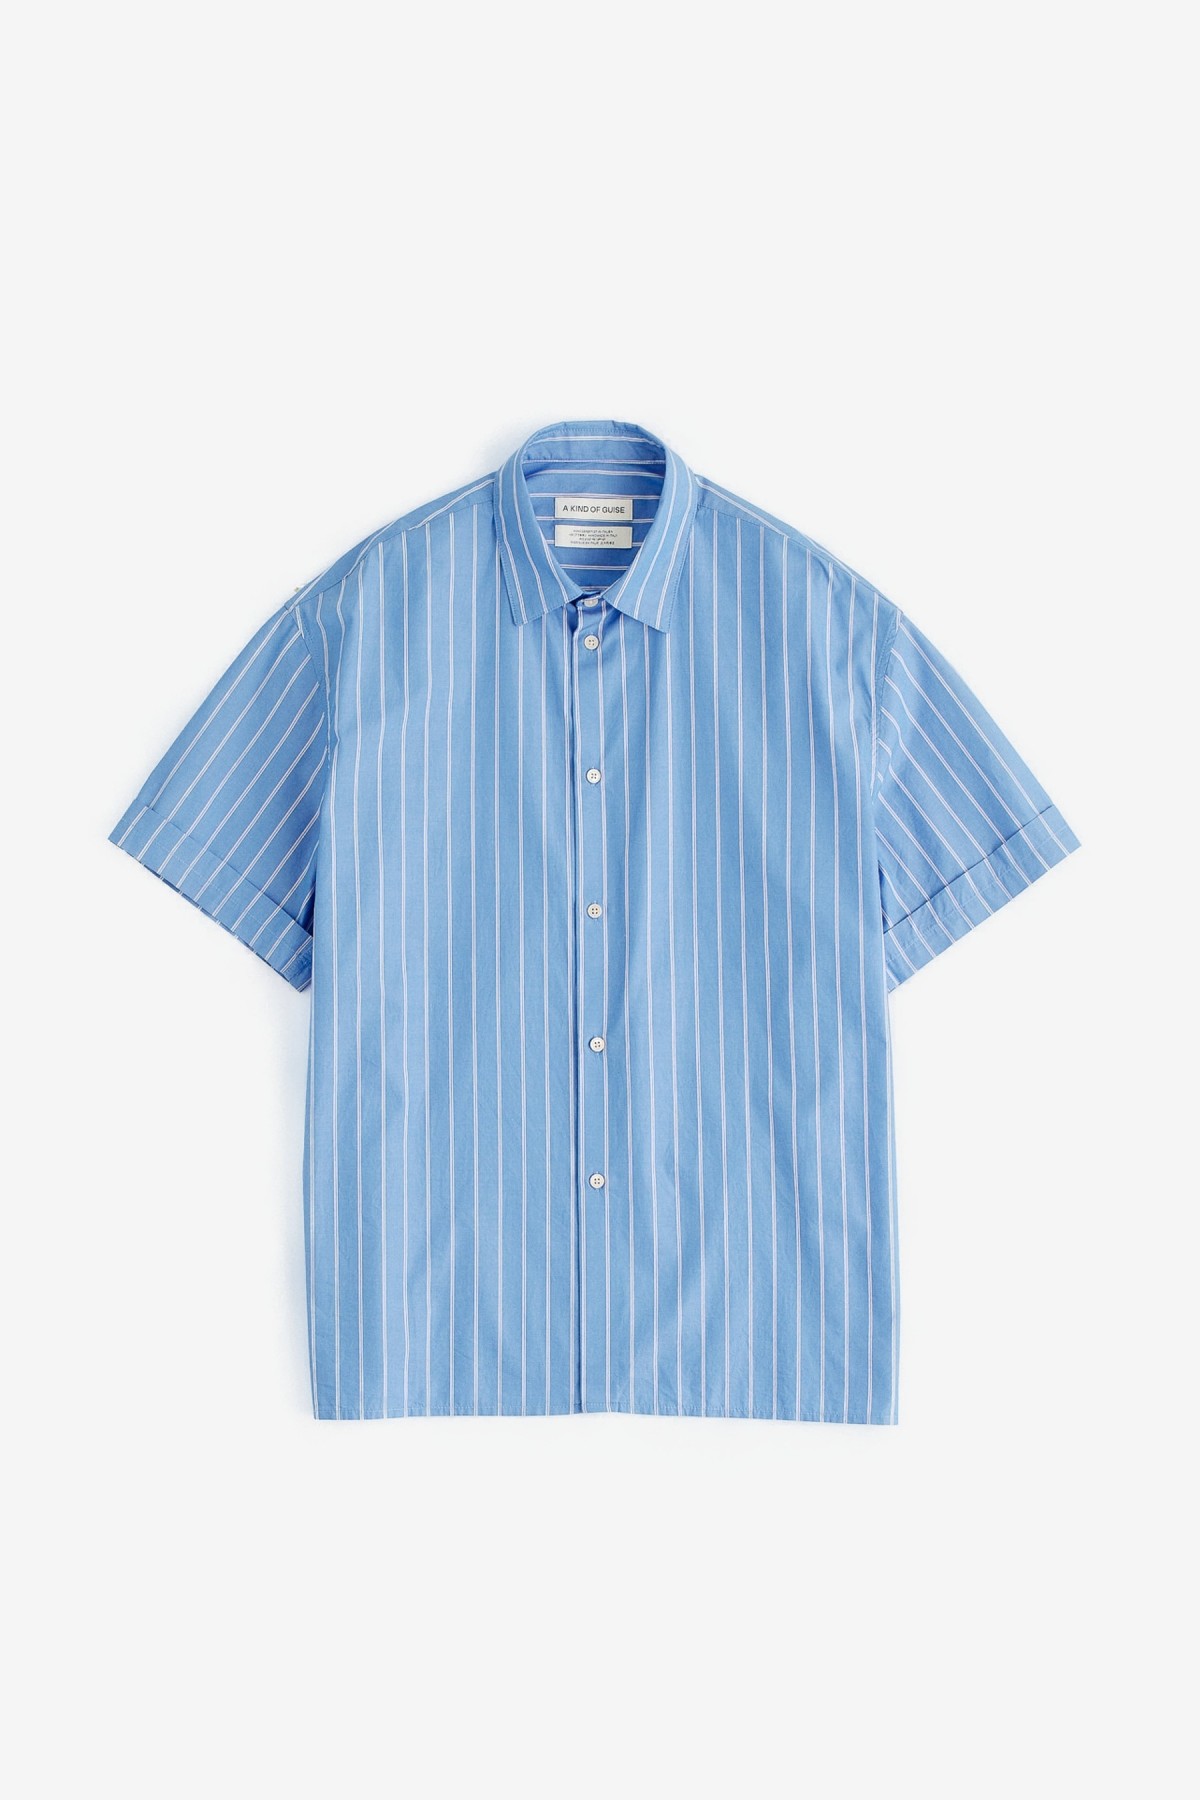 A Kind of Guise Elio Shirt in Blue Riviera Stripe